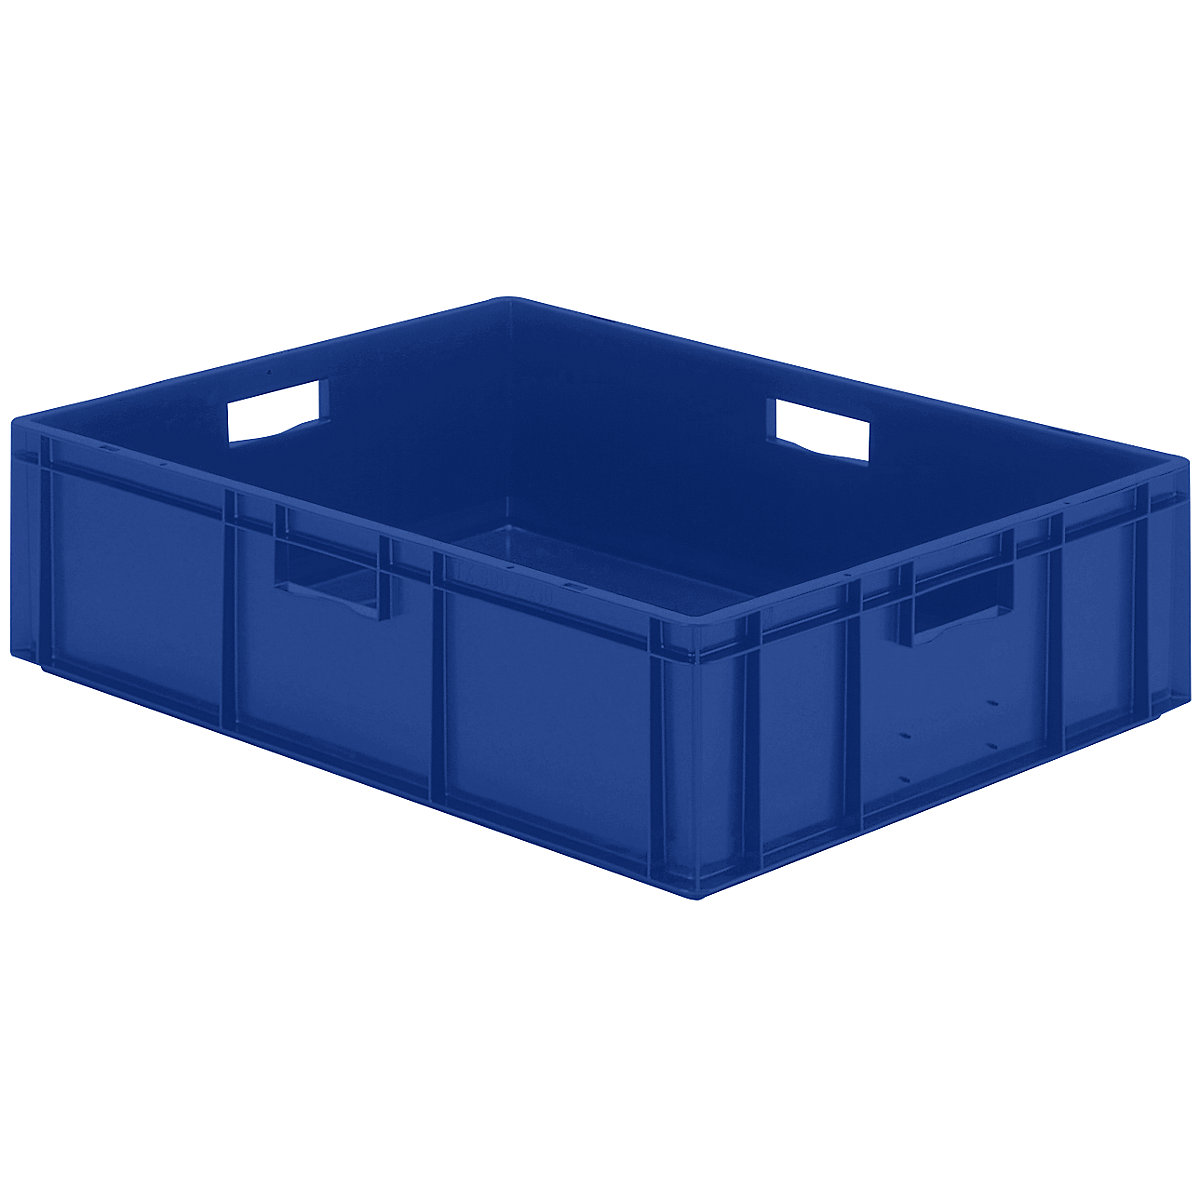 Euro stacking container, closed walls and base, LxWxH 800 x 600 x 210 mm, blue, pack of 2